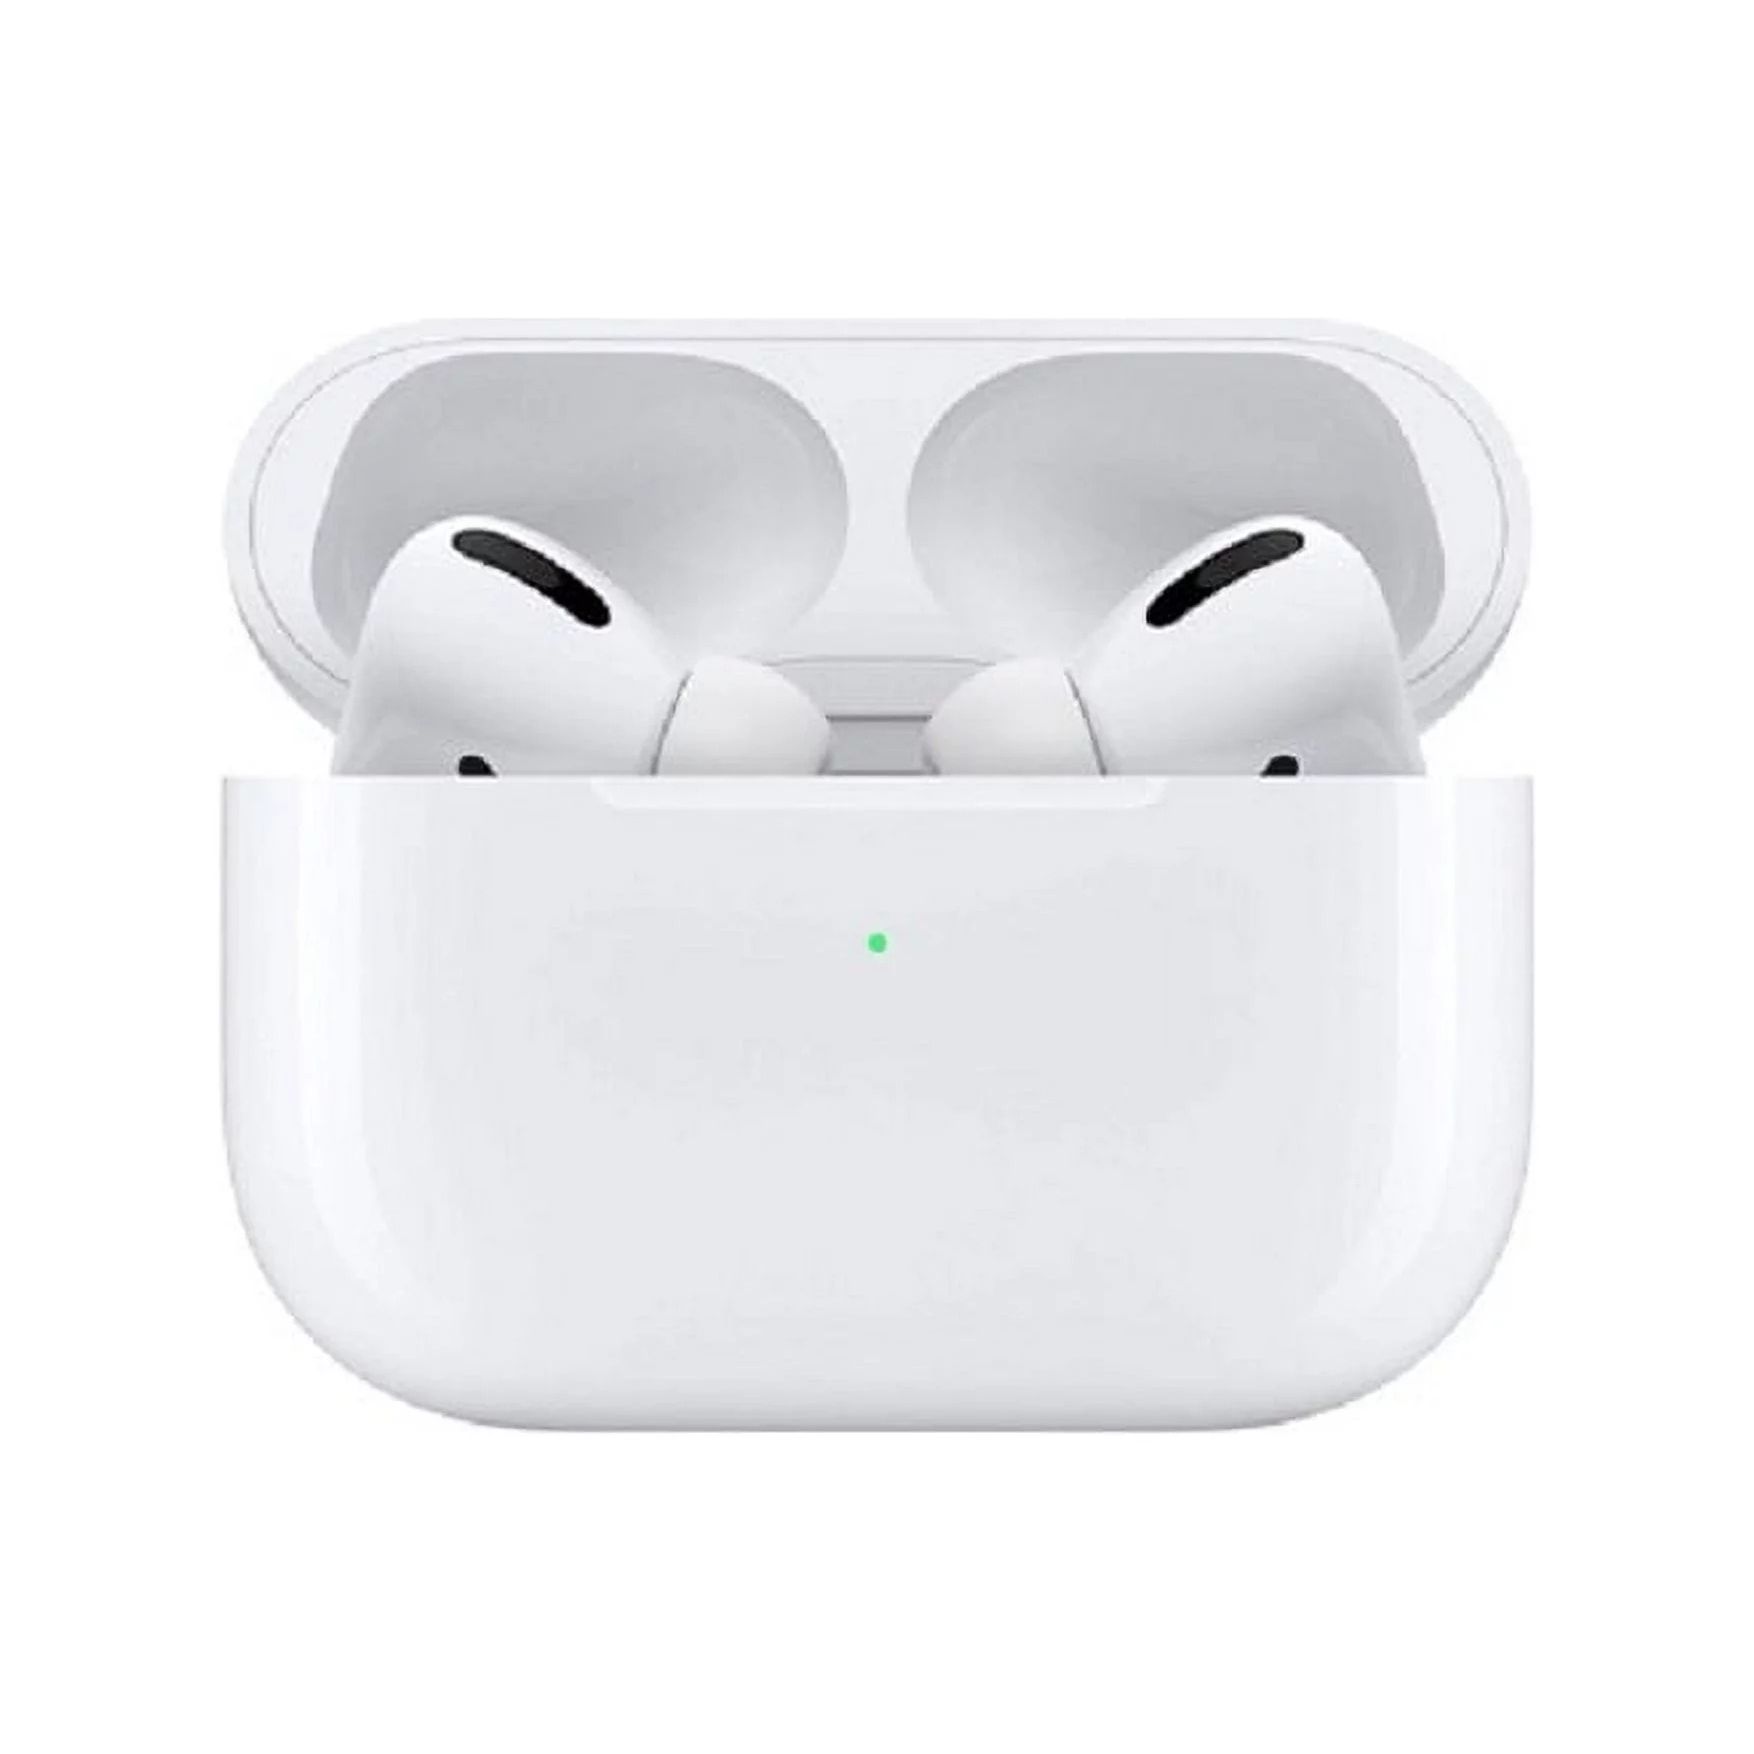 HEADSET BLUETOOTH AIR PODS PRO TWS HIGH QUALITY- MWP22AM/A ضغط ,Smartphones & Tab Headsets